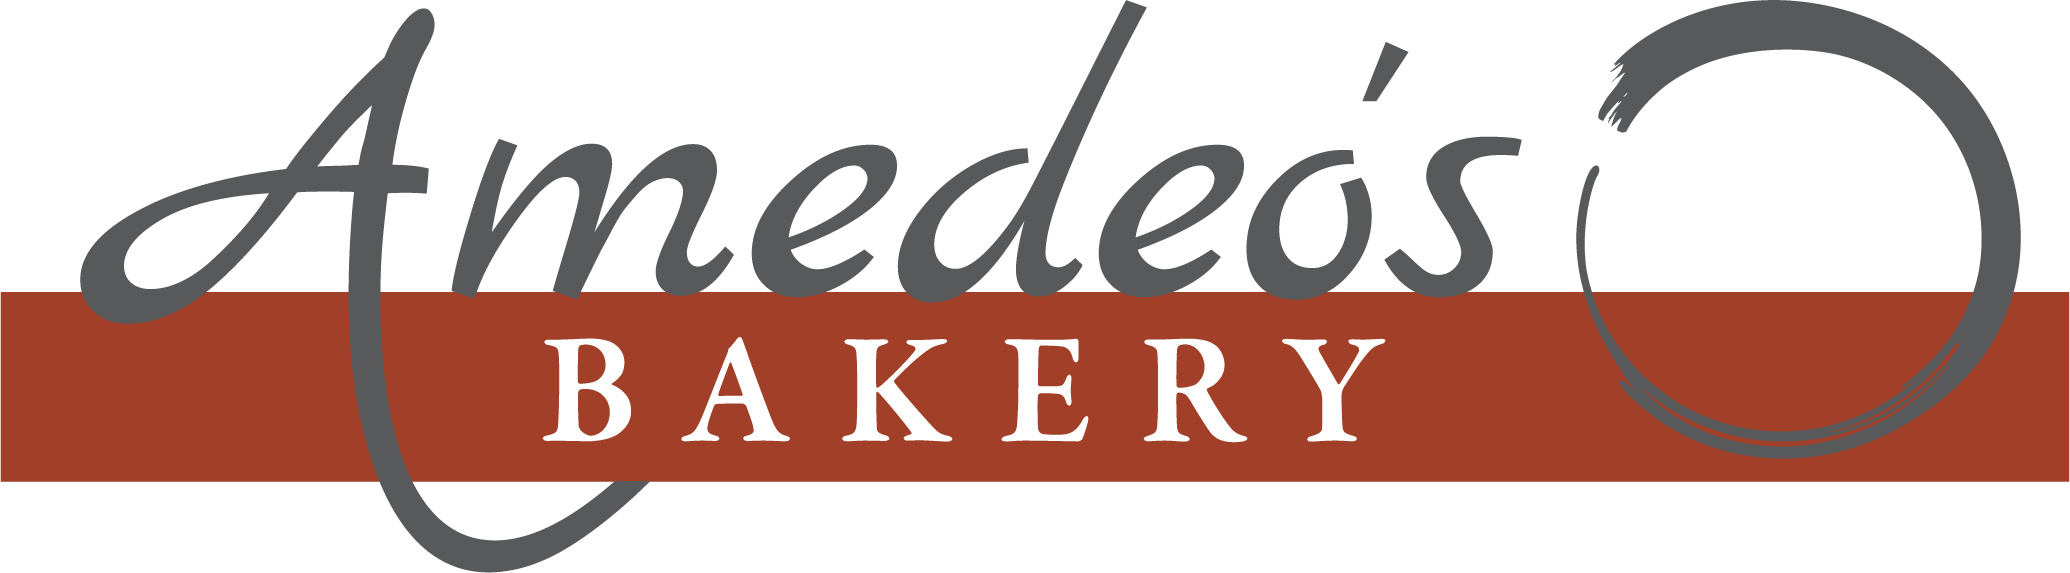 Amedeo's+Bakery.png